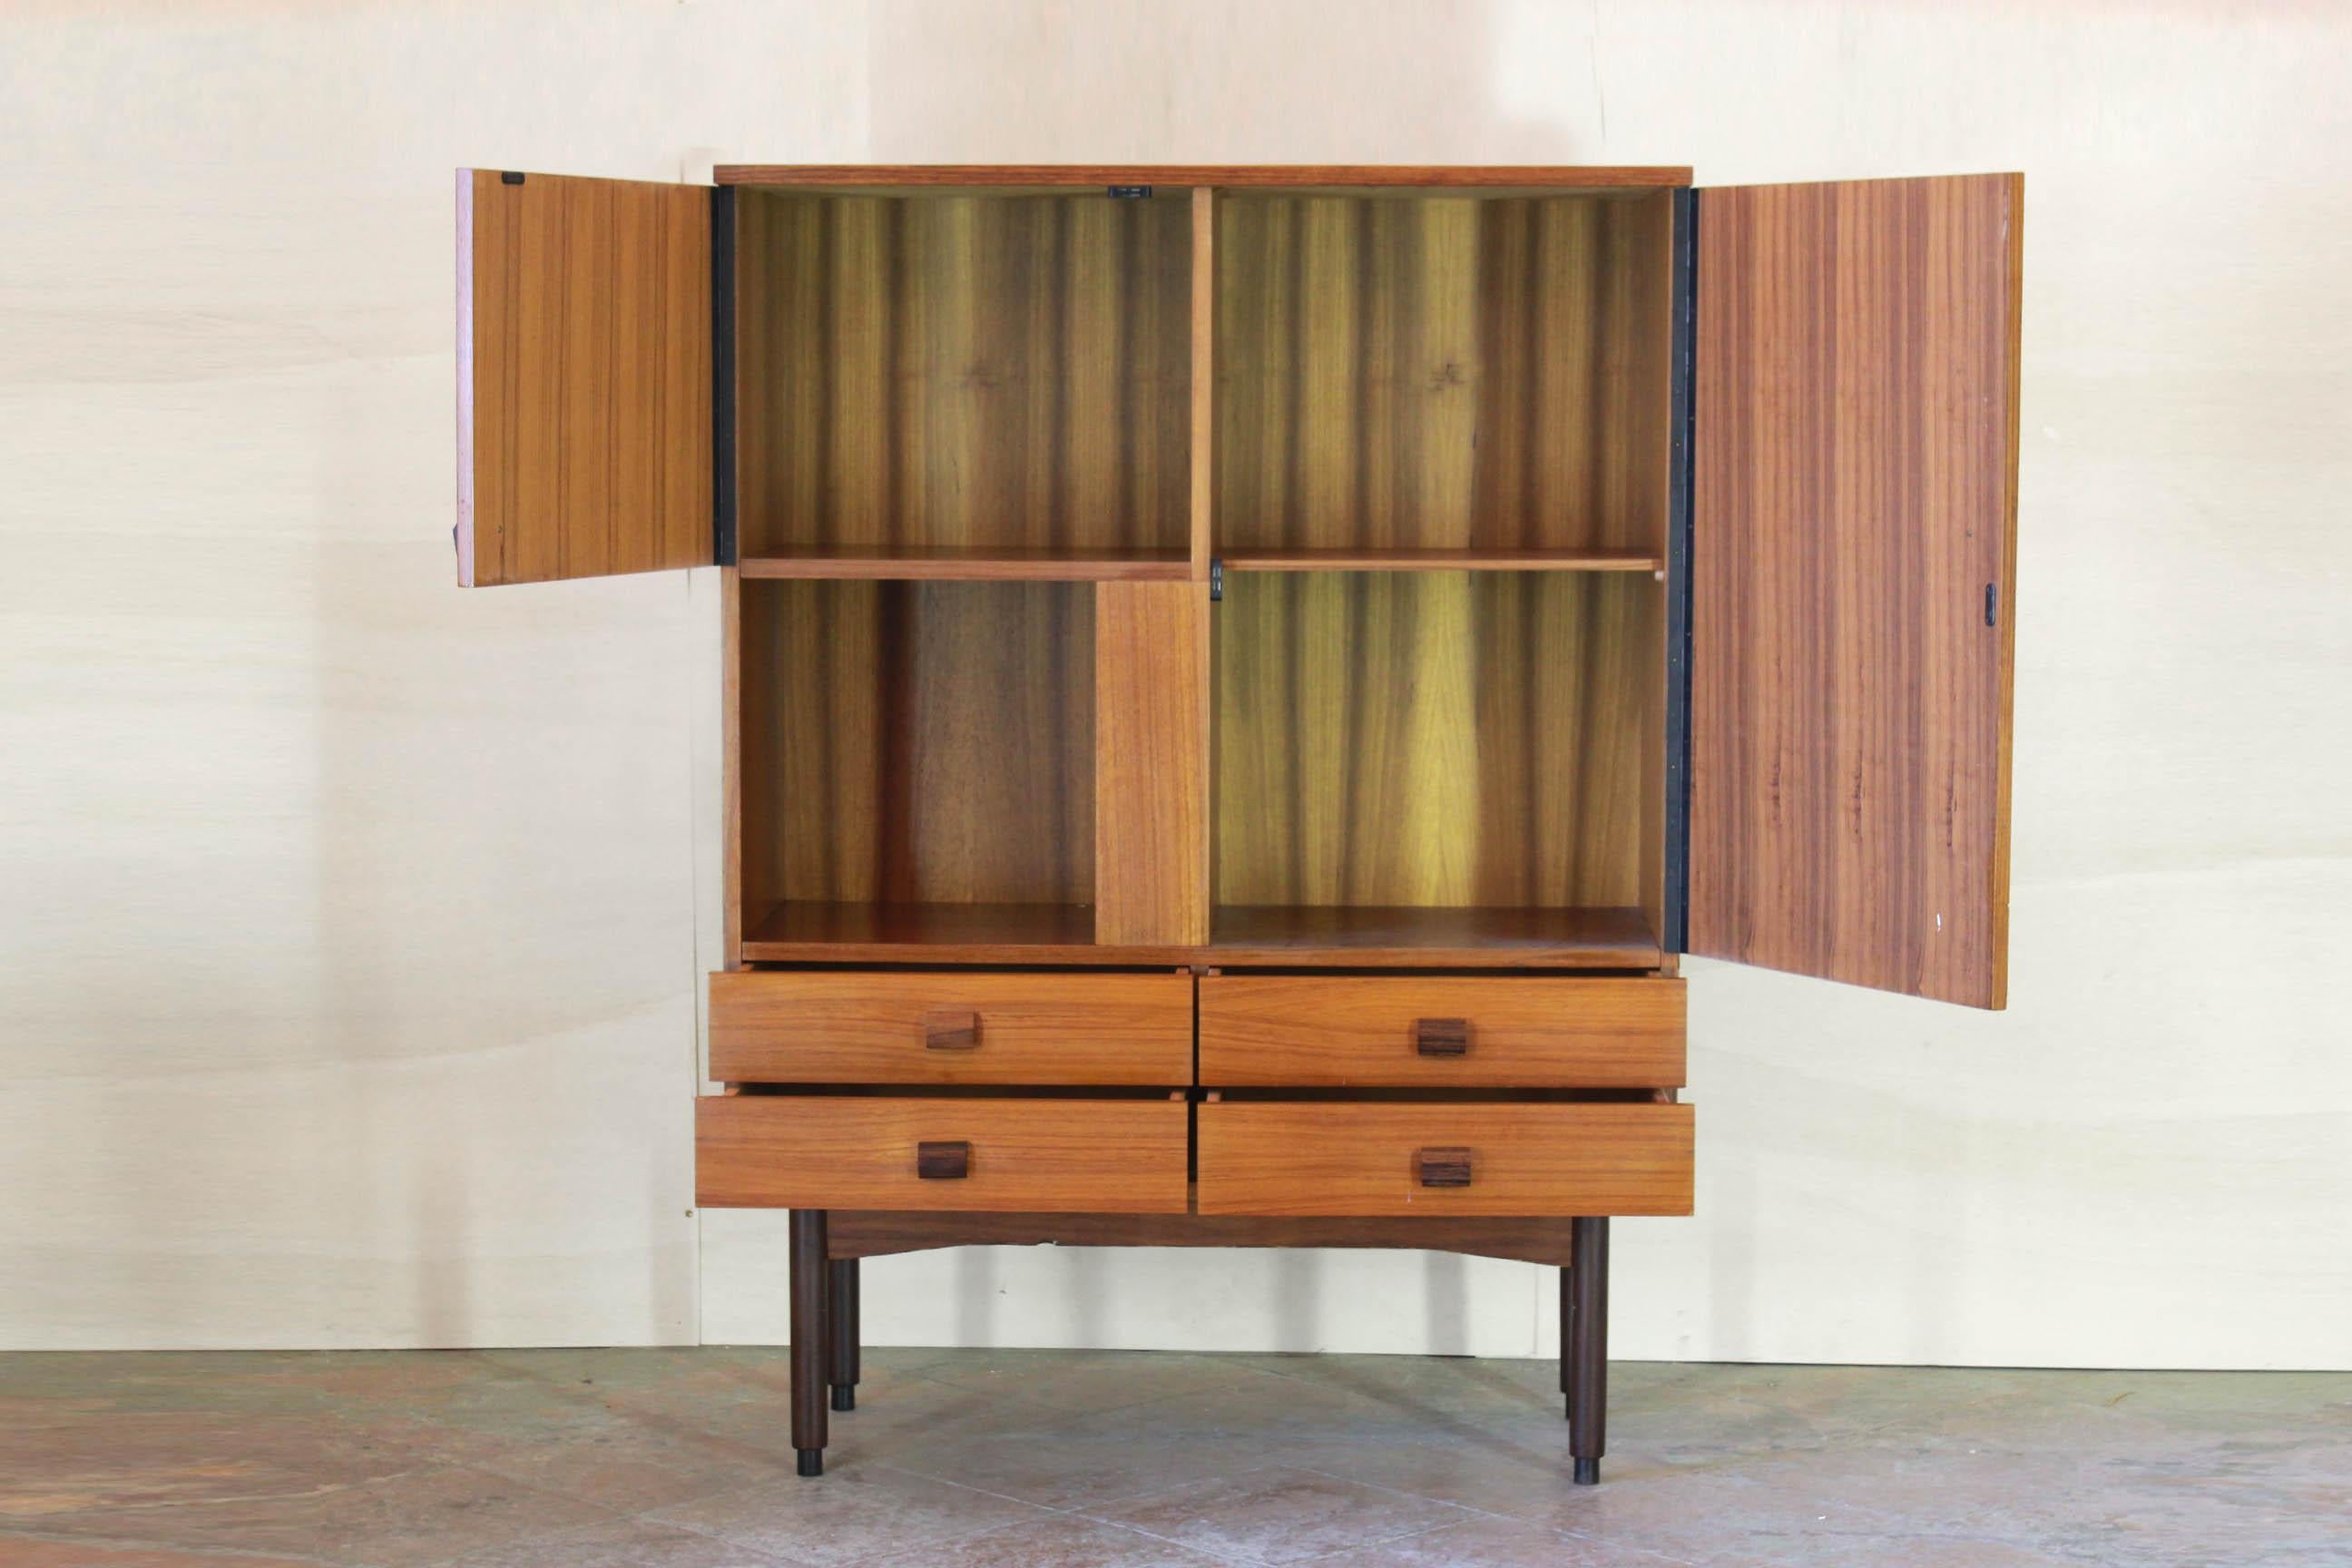 Vintage Teak high sideboard, Scandinavia 1950s
A beautiful 1950s teak vintage highboard in wood venereed with pure teak. The item has been completely restored, cleaned and polished. In excellent conditions with only few signs of time.
 